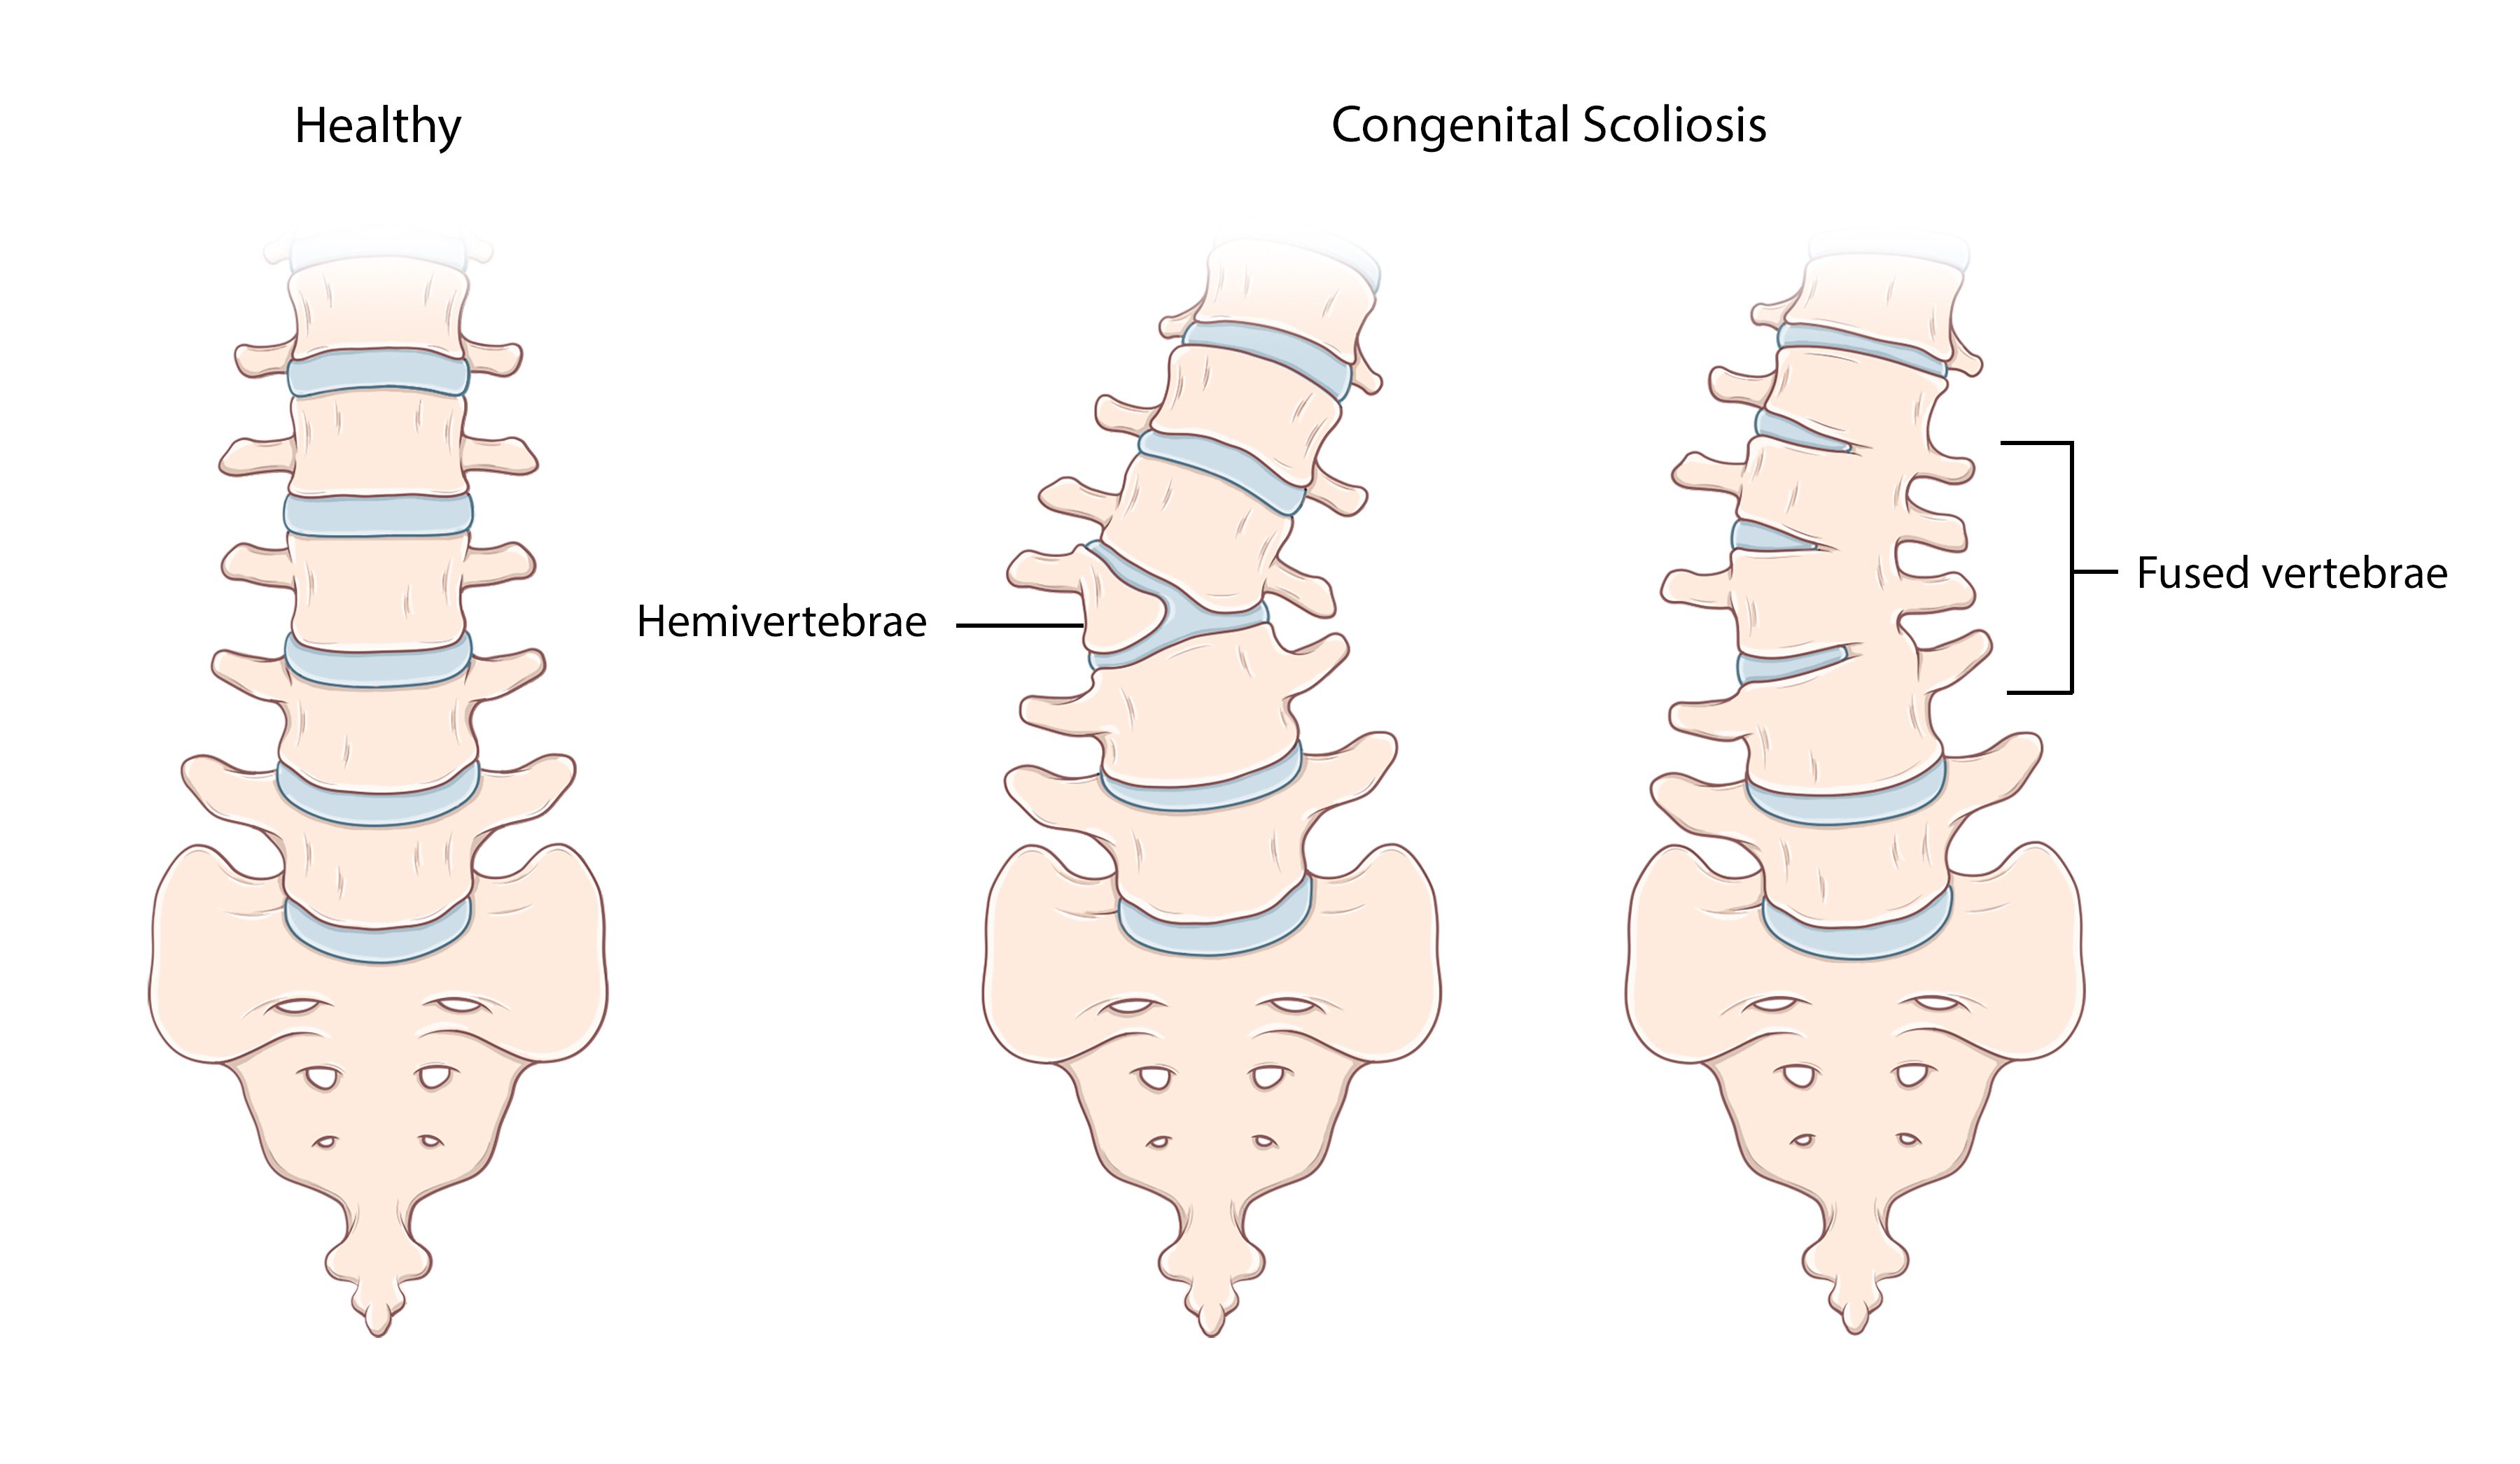 Congenital scoliosis occurs early in pregnancy, when one or more of the vertebrae in the spine don’t form completely.